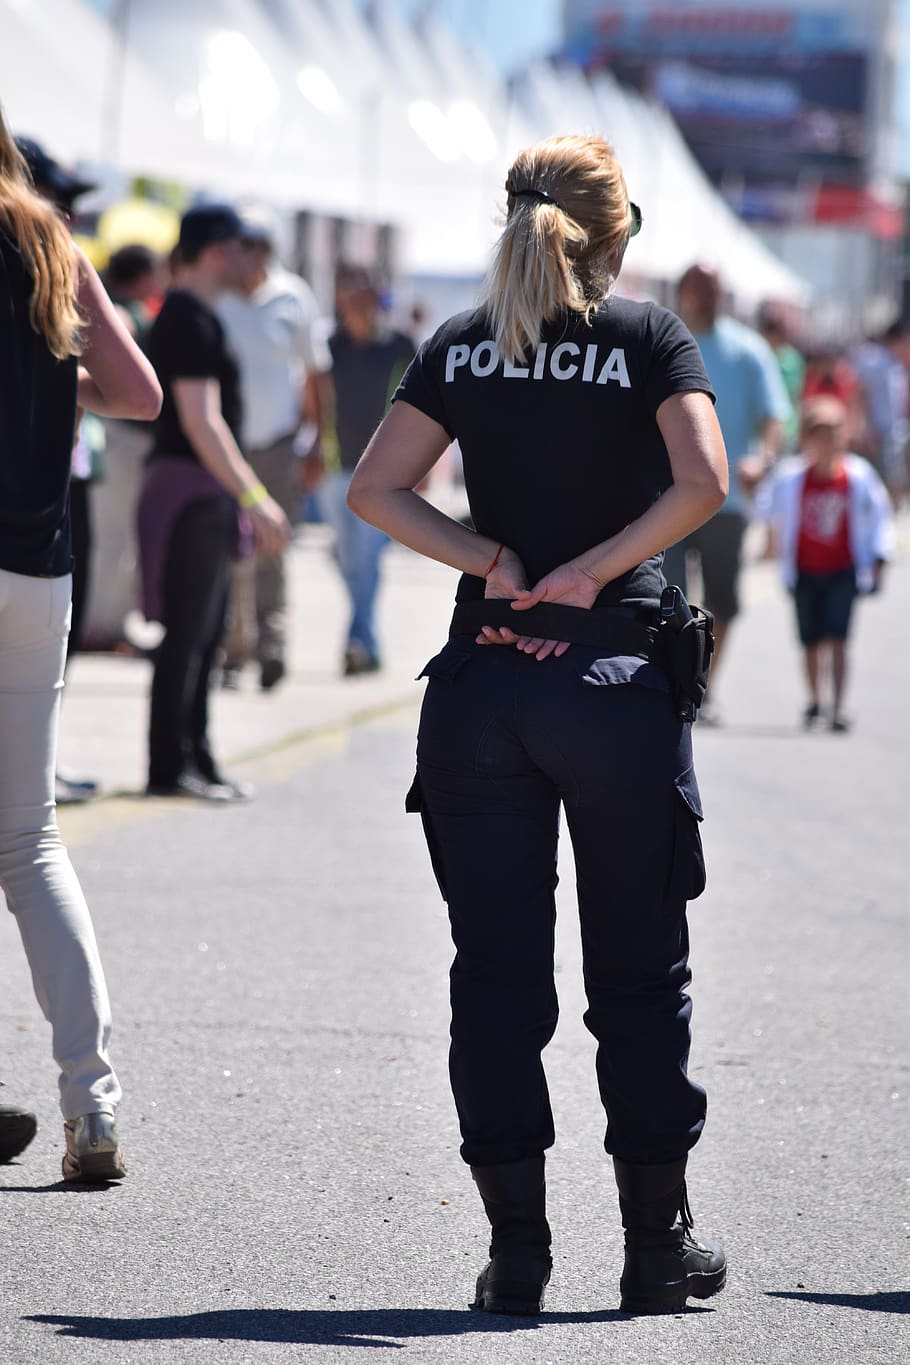 police, sexy woman, girl, pretty, real people, city, incidental people, focus on foreground, street, rear view